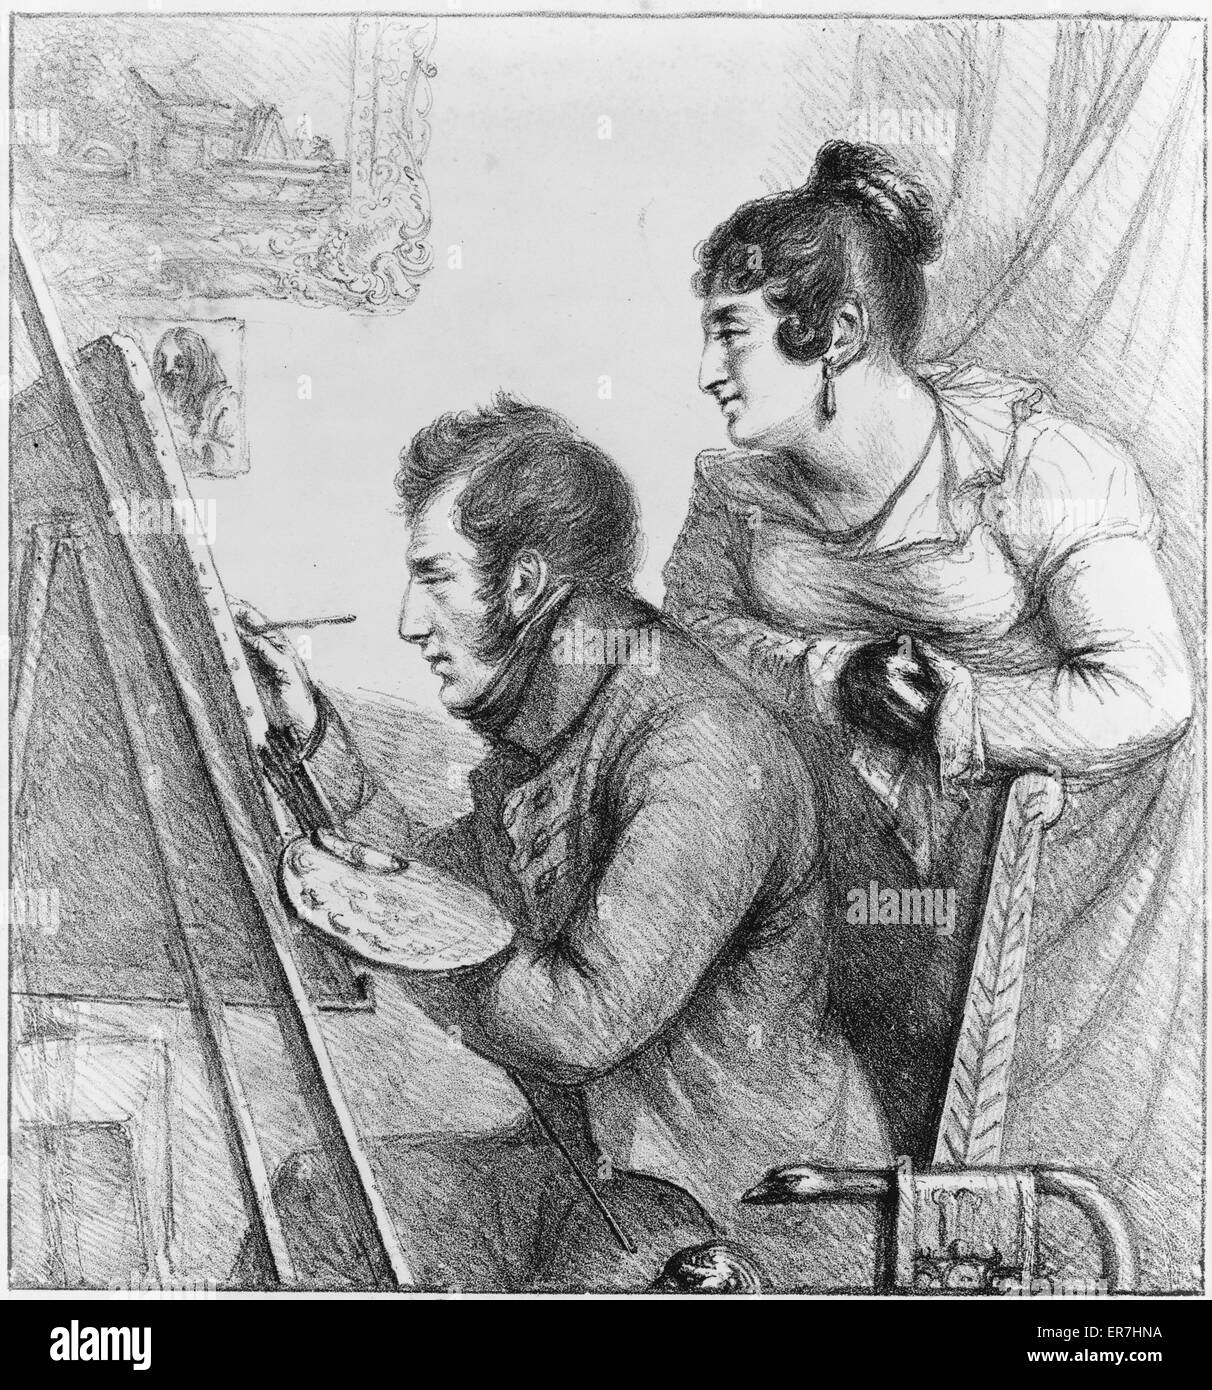 Self portrait painting with a woman looking on. Date 1823. Stock Photo